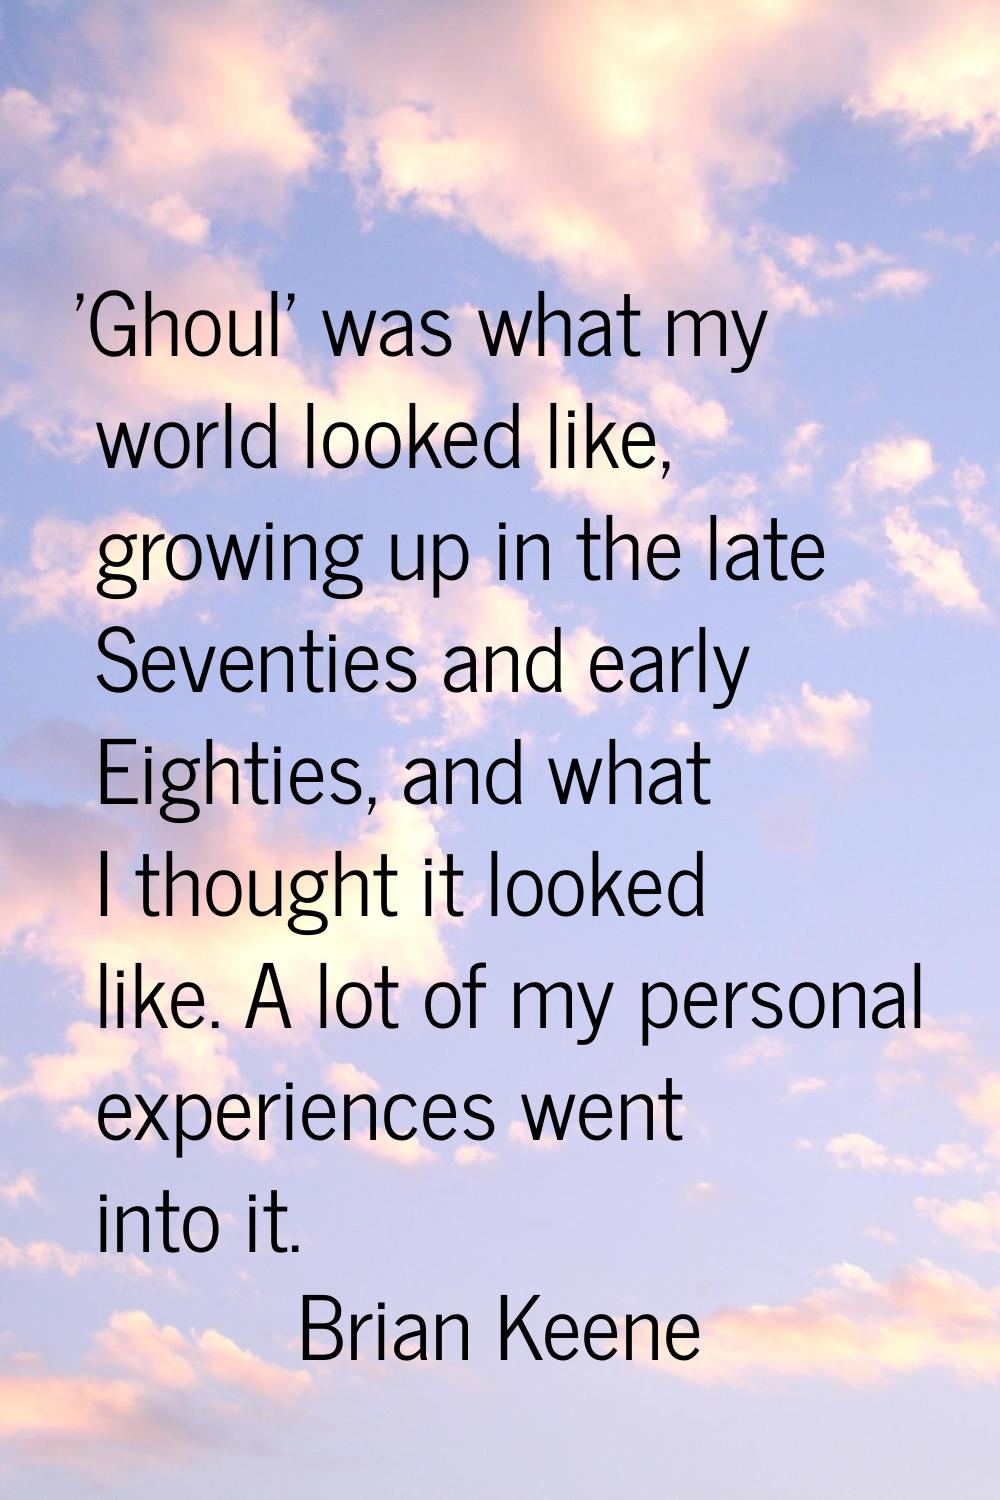 'Ghoul' was what my world looked like, growing up in the late Seventies and early Eighties, and wha